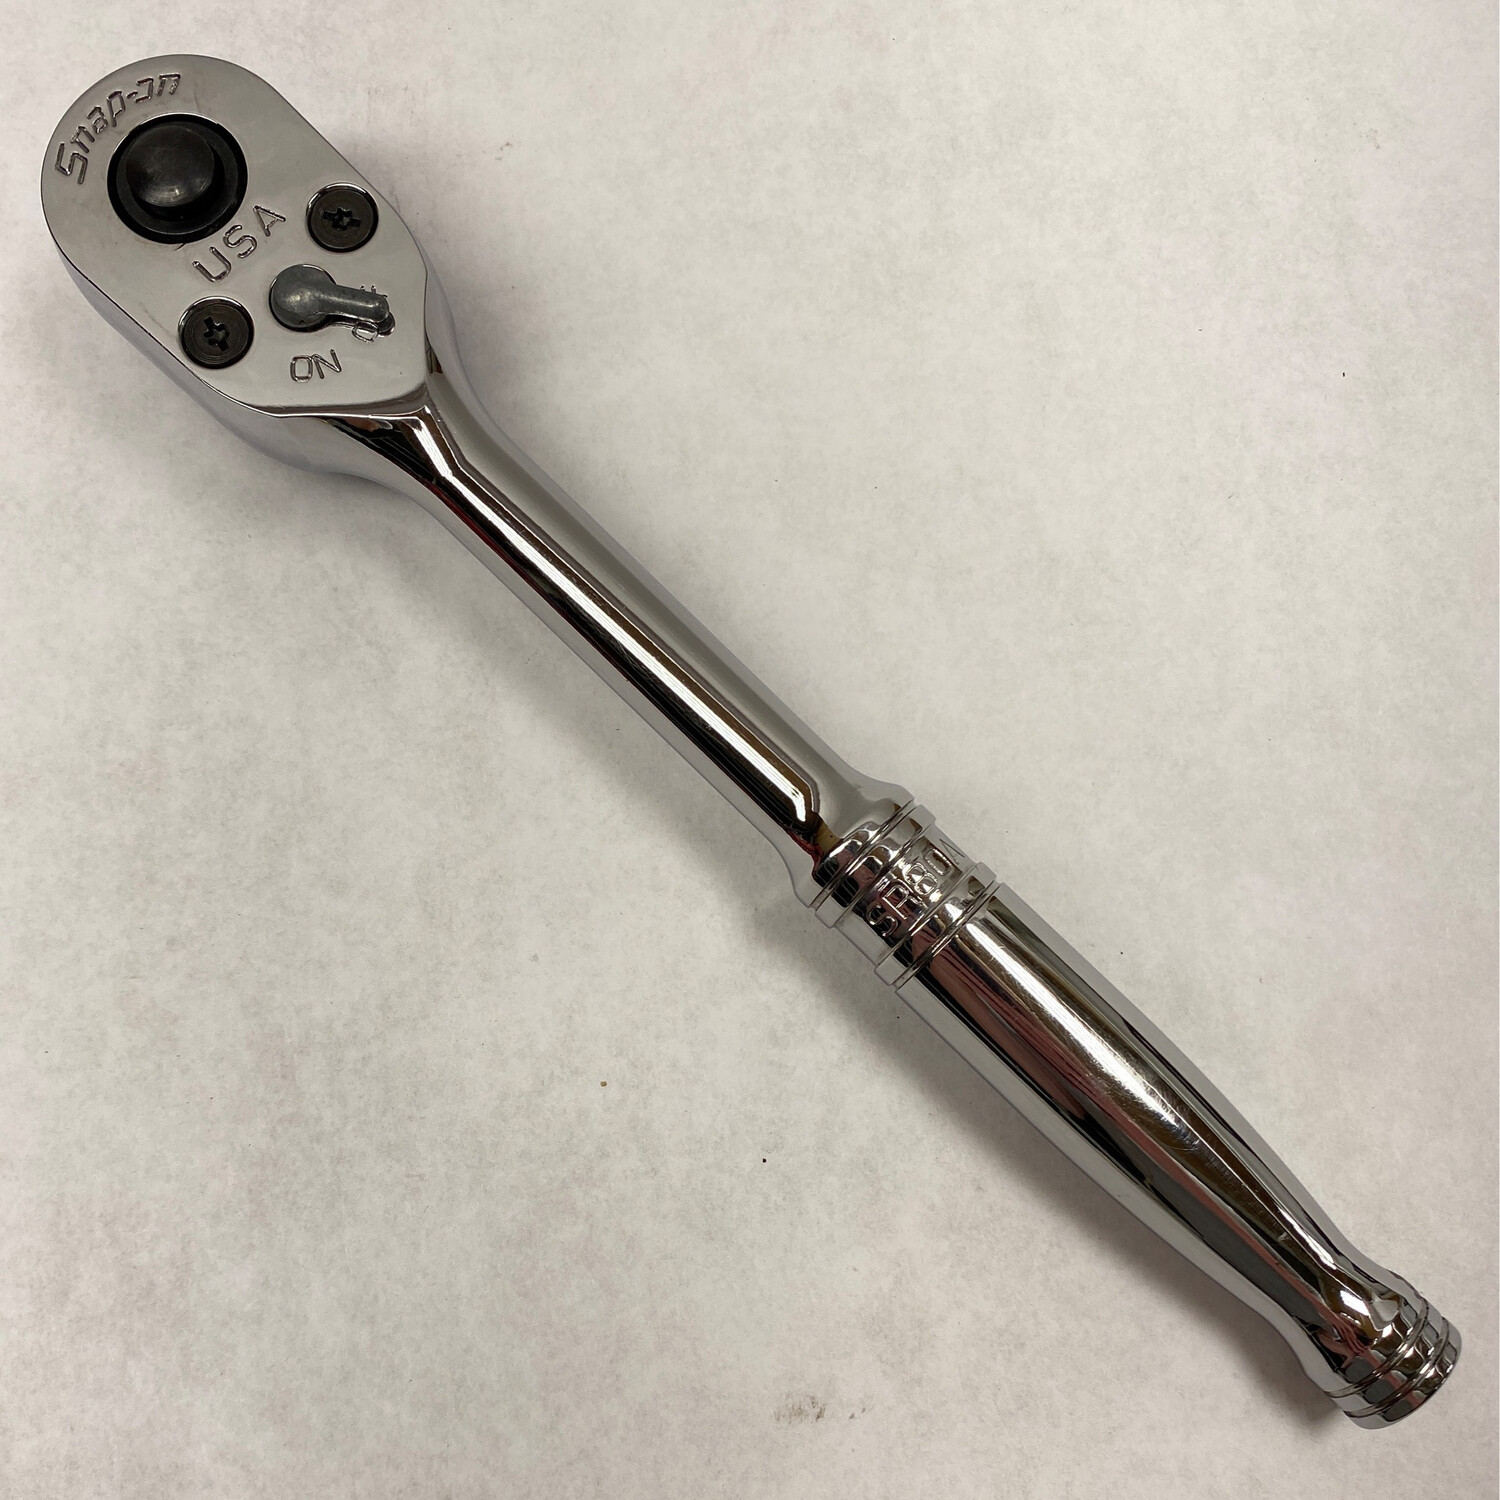 NEW Snap On 1/2” Drive 10-1/4” Long Quick Release Ratchet, SR80A